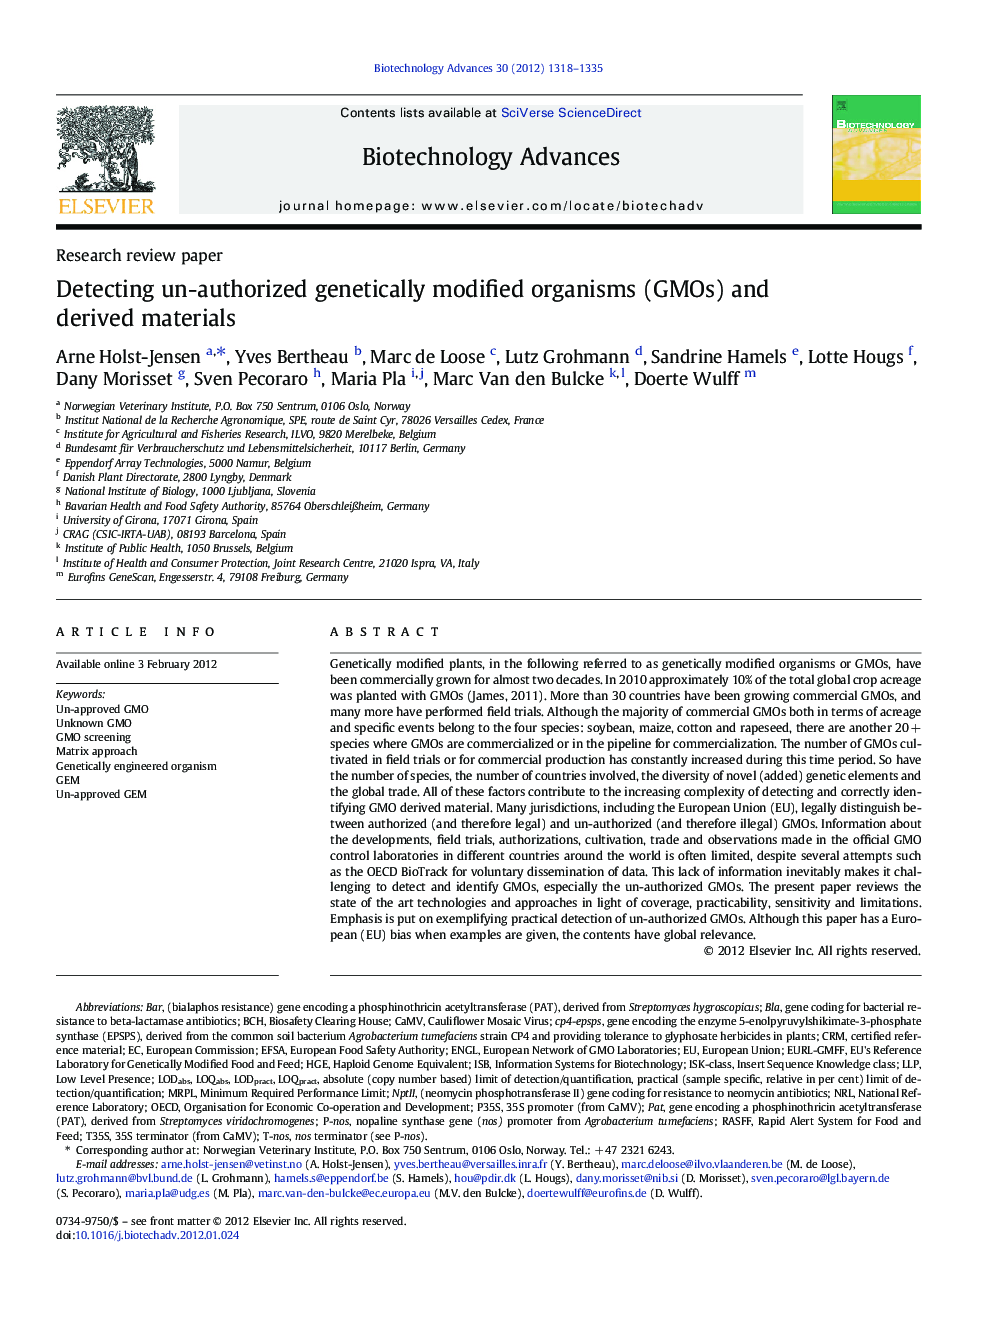 Detecting un-authorized genetically modified organisms (GMOs) and derived materials